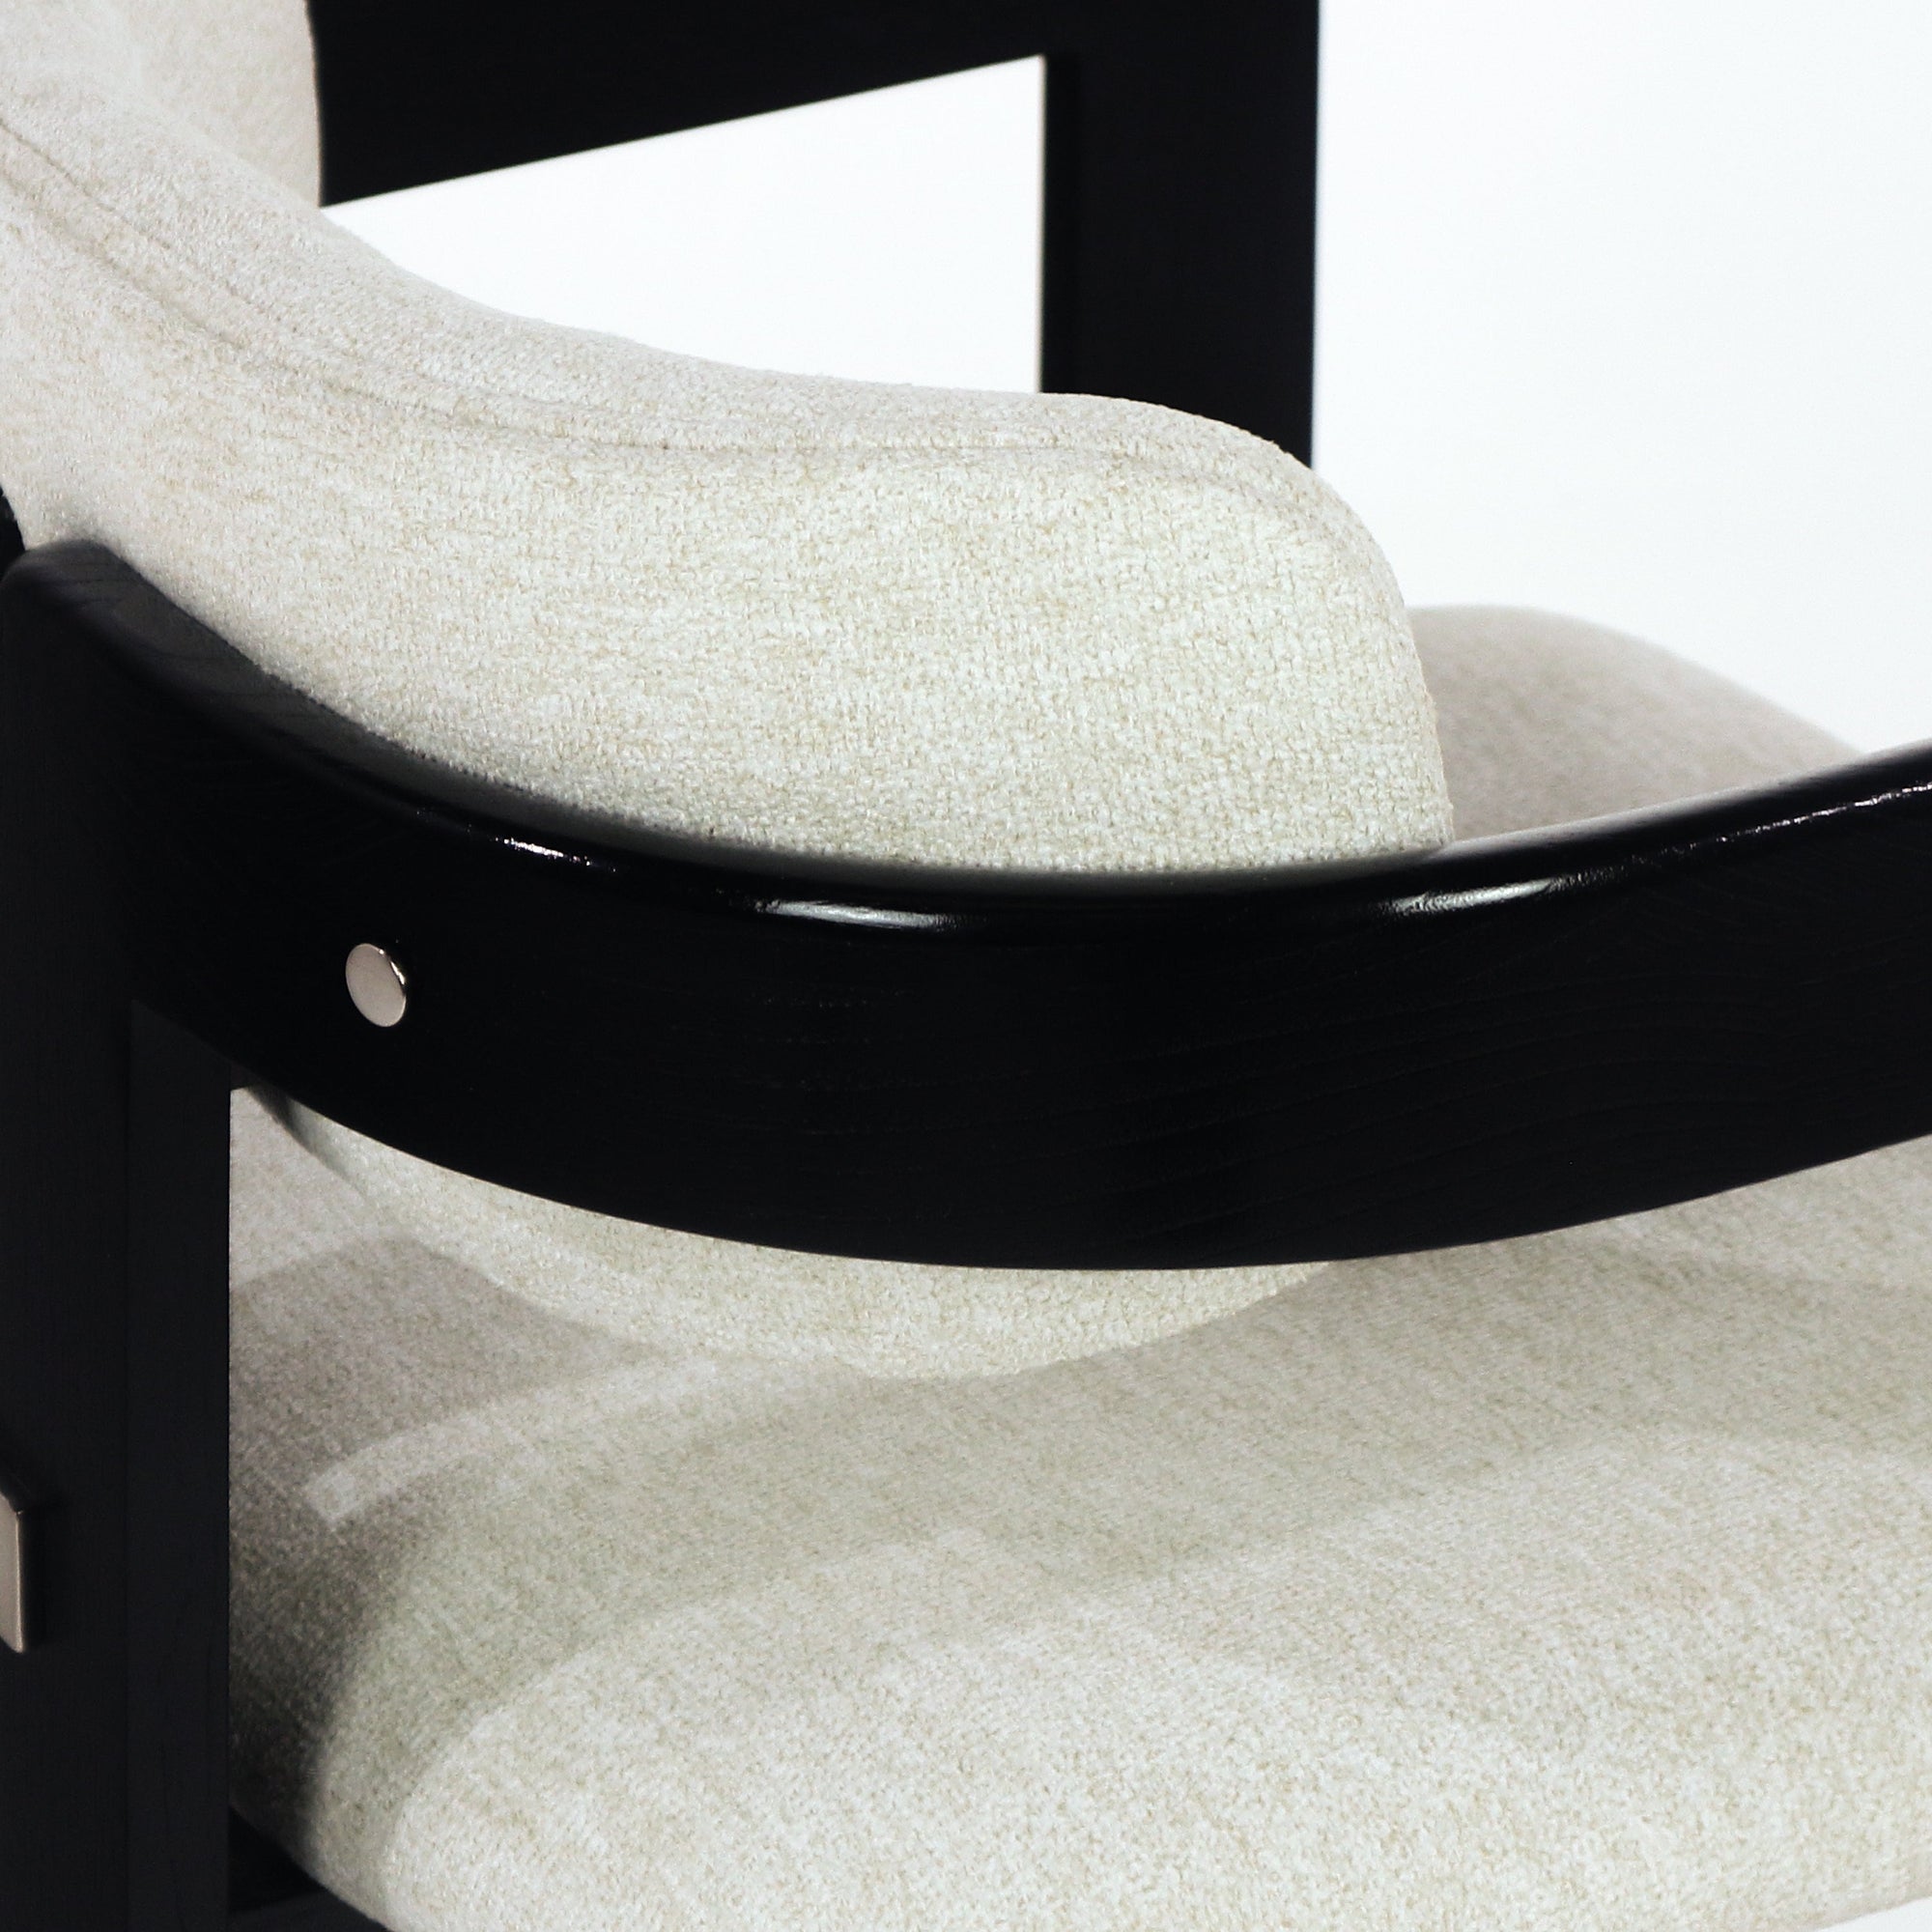 Black Pamplona Dining Chair with Beige Boucle and Stainless Steel Accents